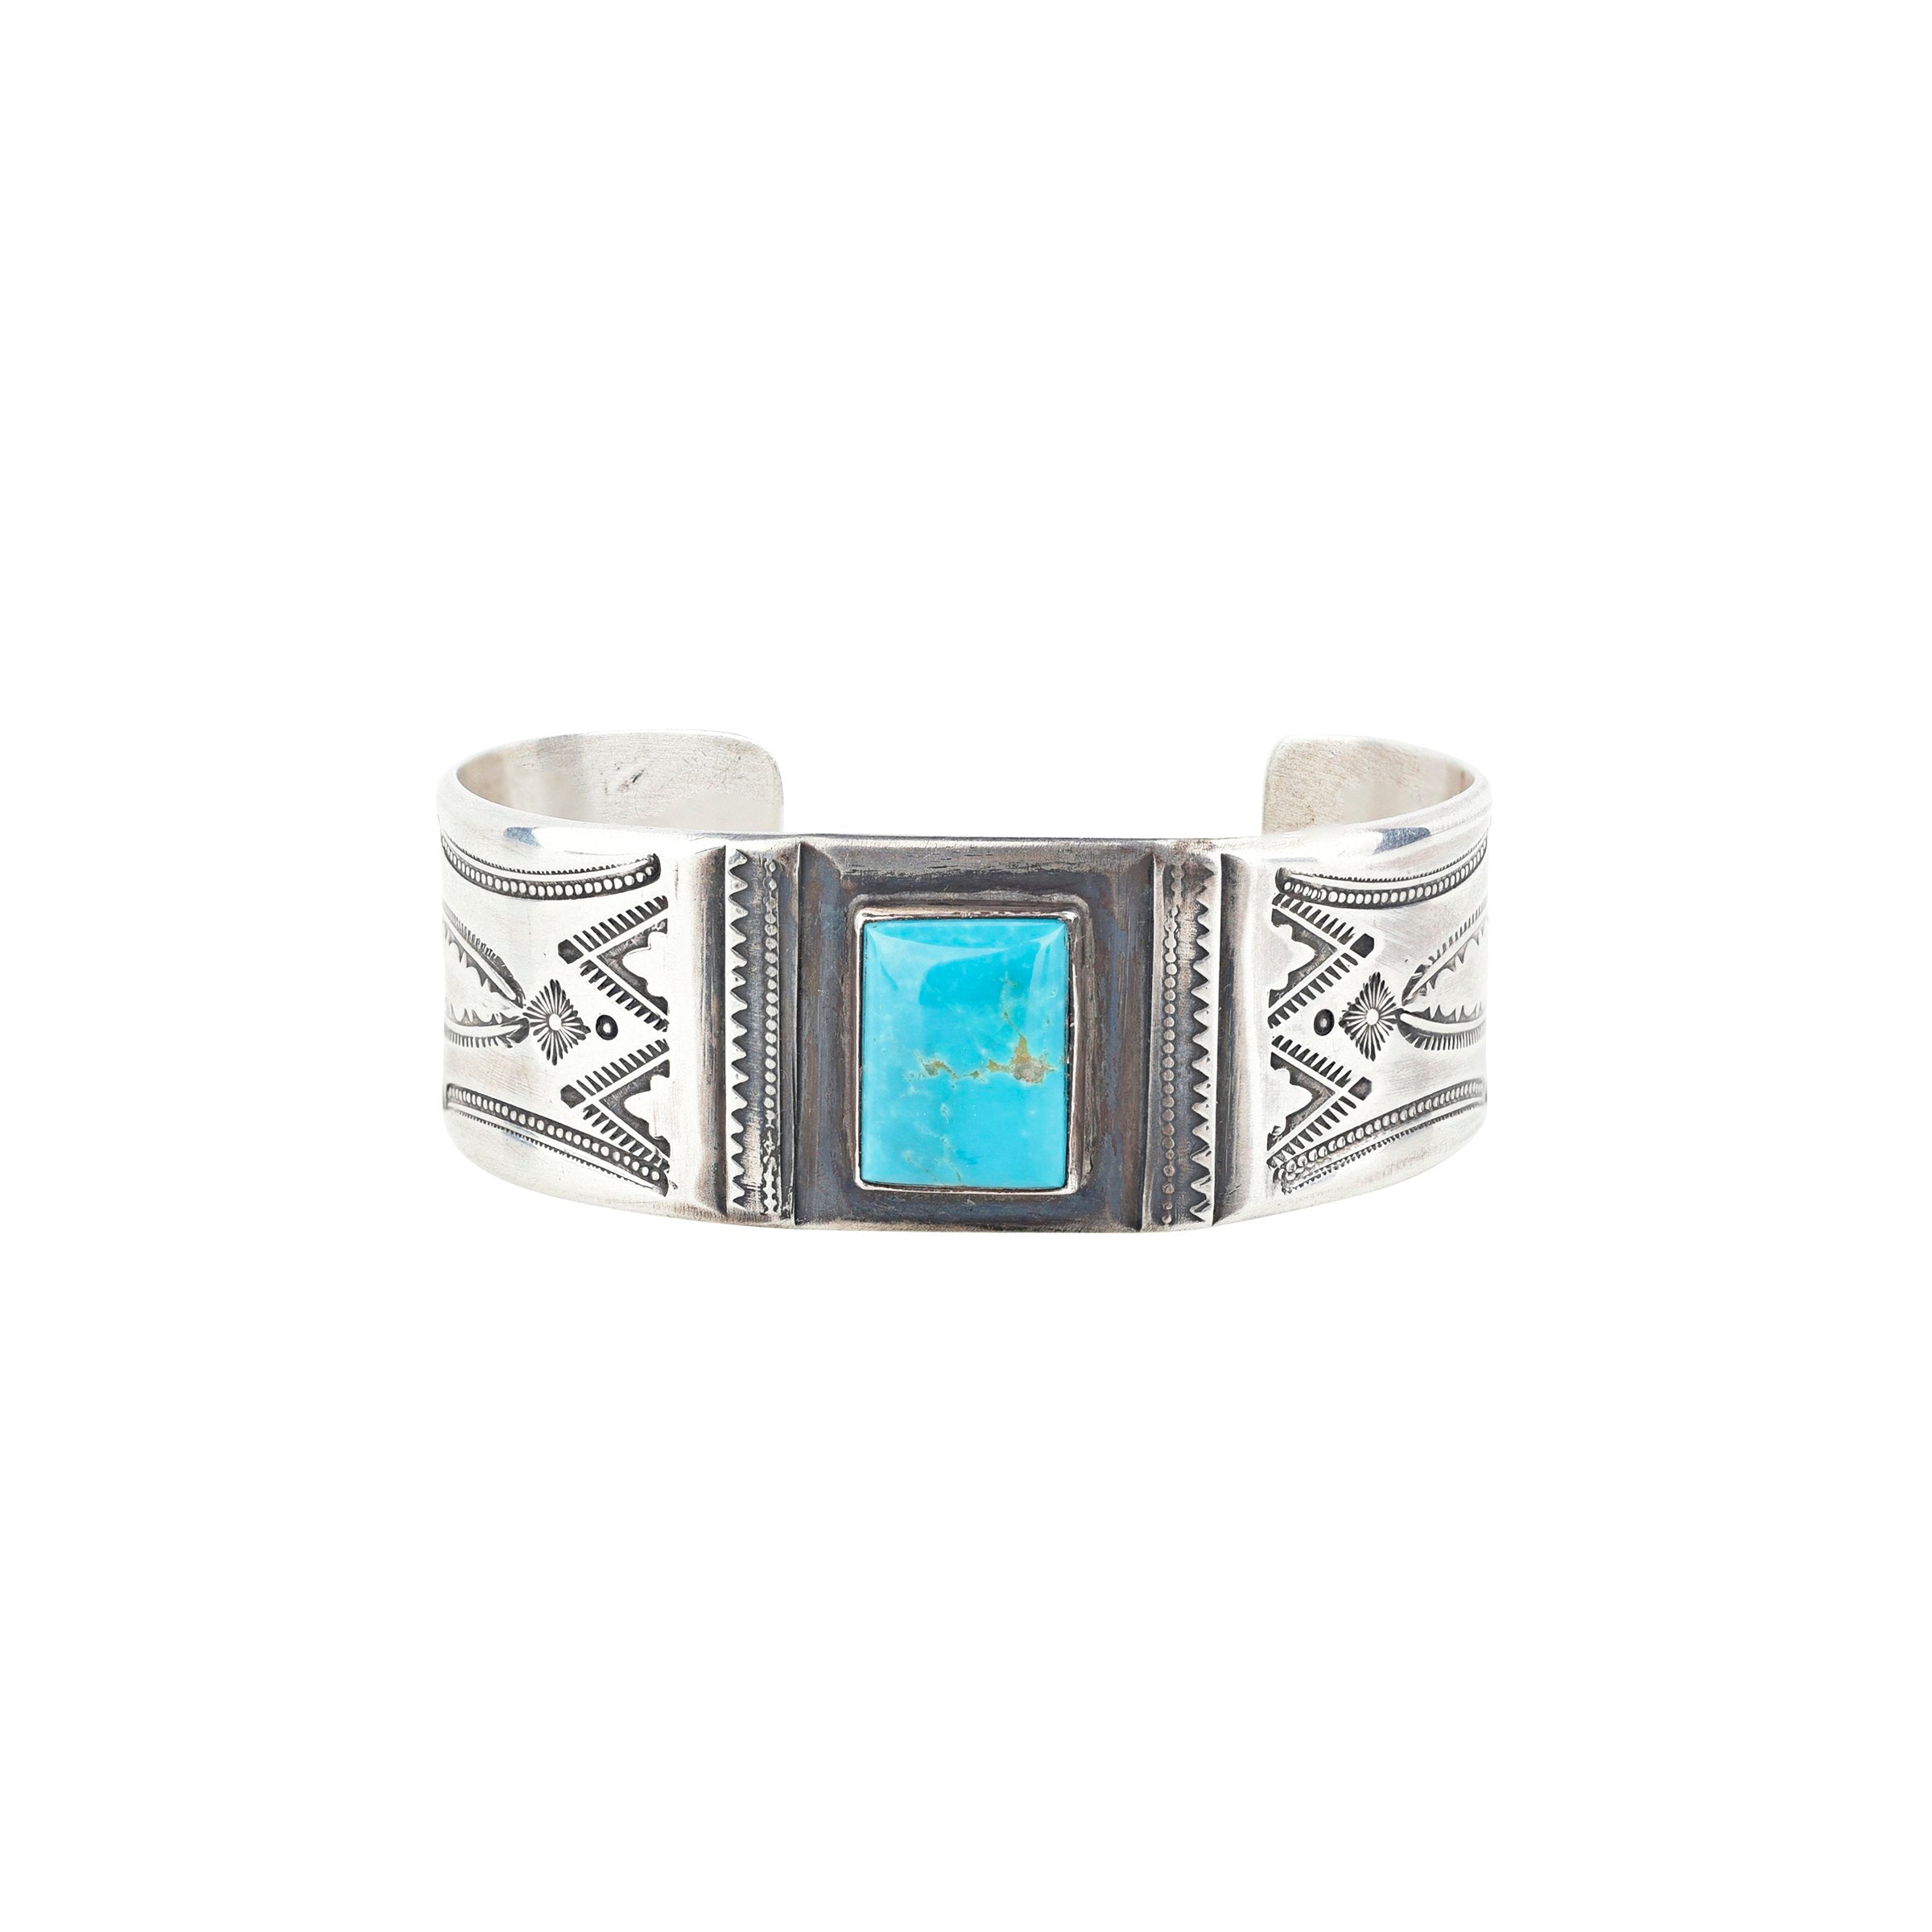 Kim Somers Turquoise Cuff